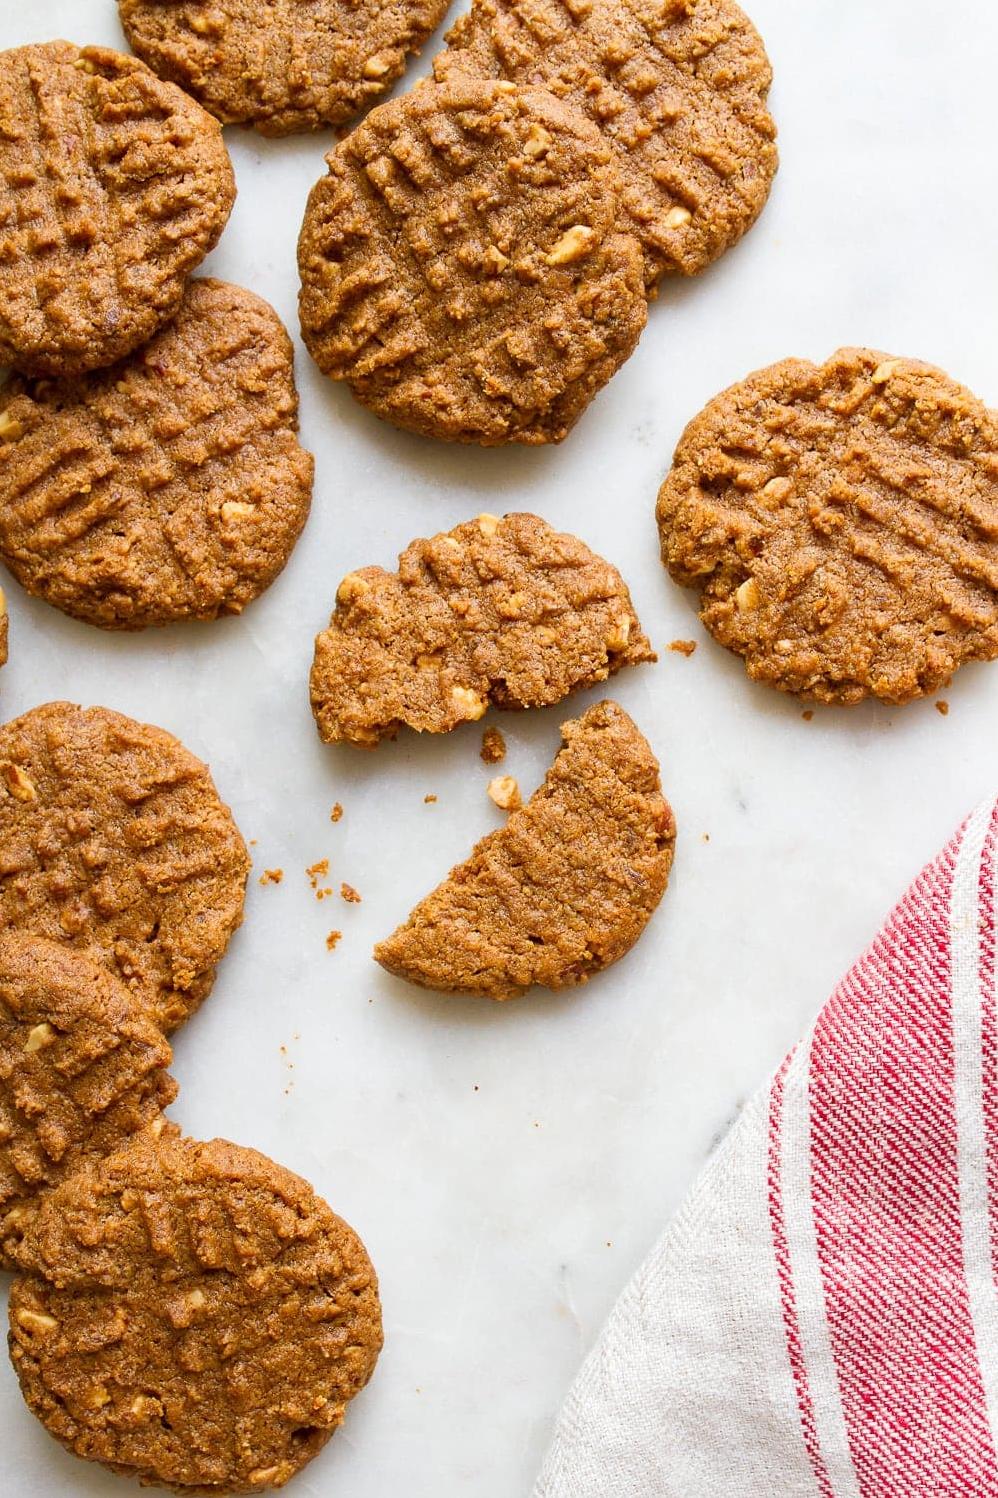  When life gives you almonds, make almond butter cookies!